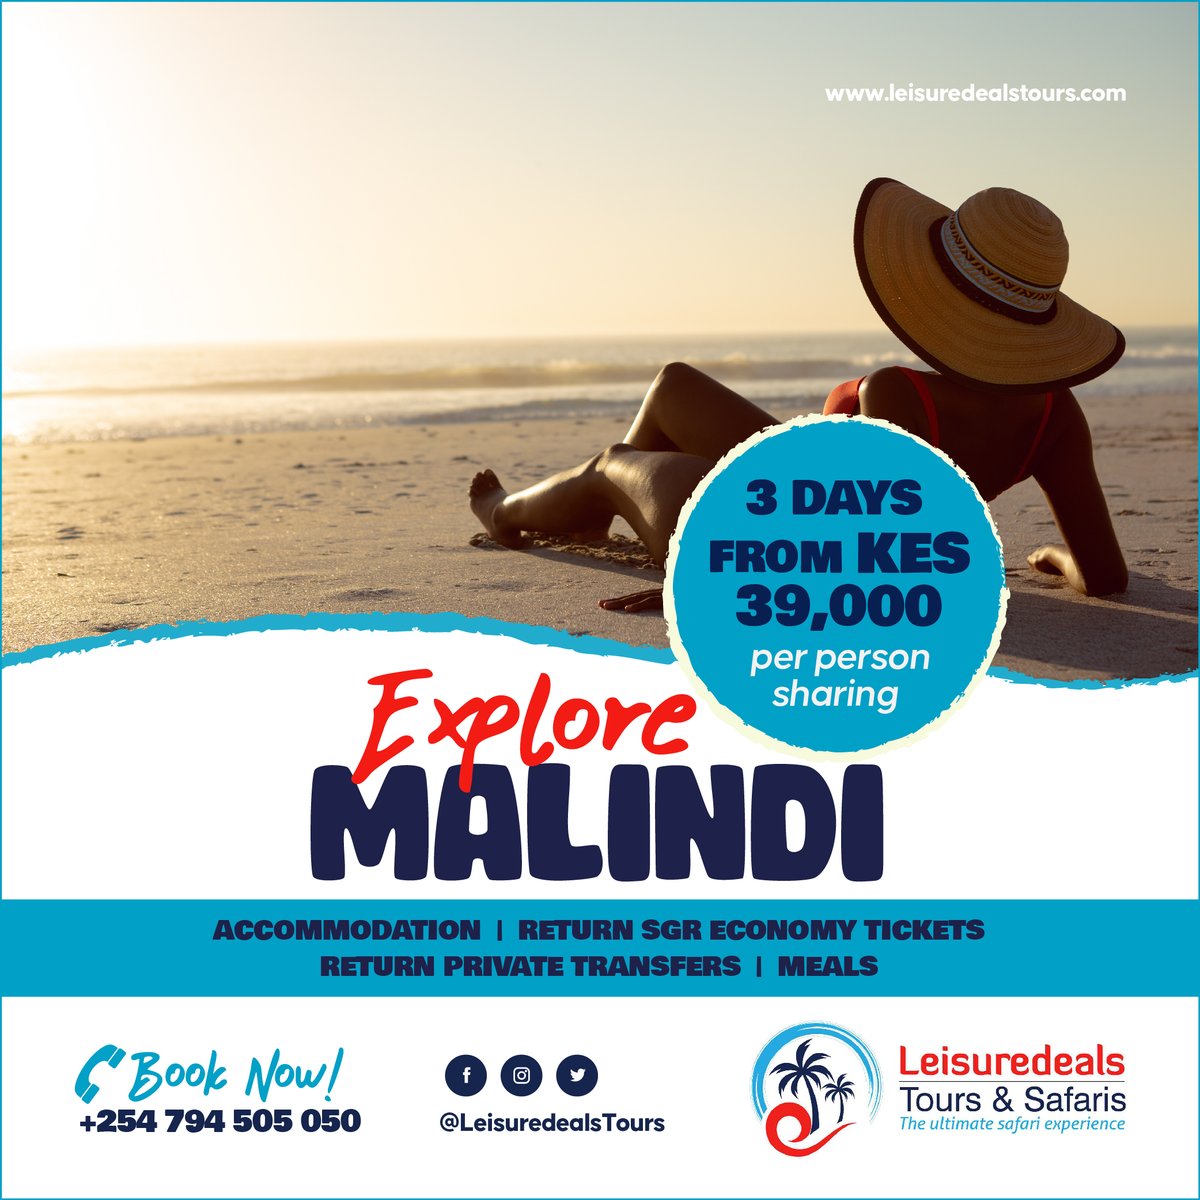 Escape to Malindi for less! 🌴✈️ Book now starting from just 39,000! Don't miss out on this incredible holiday deal. 🏖️ #MalindiGetaway #HolidayDeal #LeisuredealsTours #TravelGoals #AdventureAwaits 💼 #AD